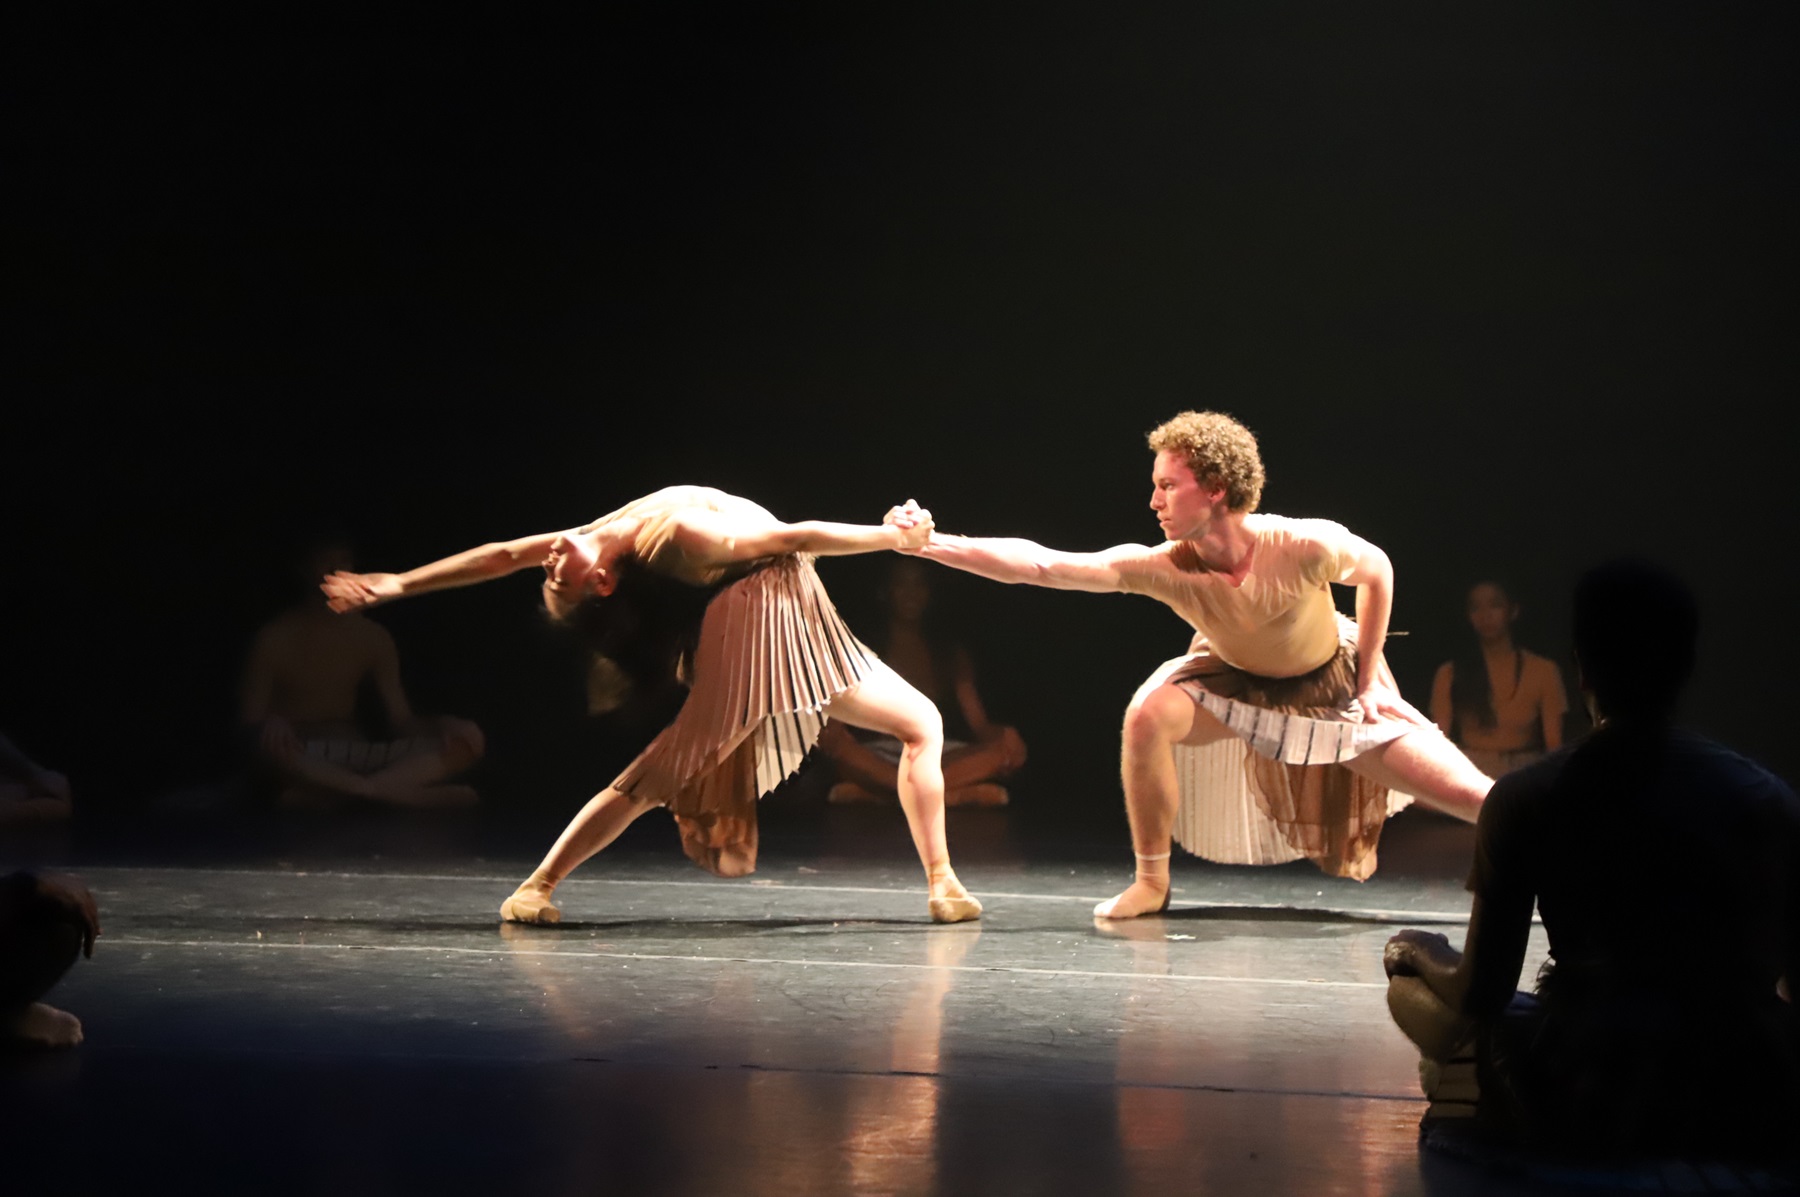 Charlotte Ballet dancers Luke Csordas and Evelyn Robinson in the performance series, "From Africa With Love."